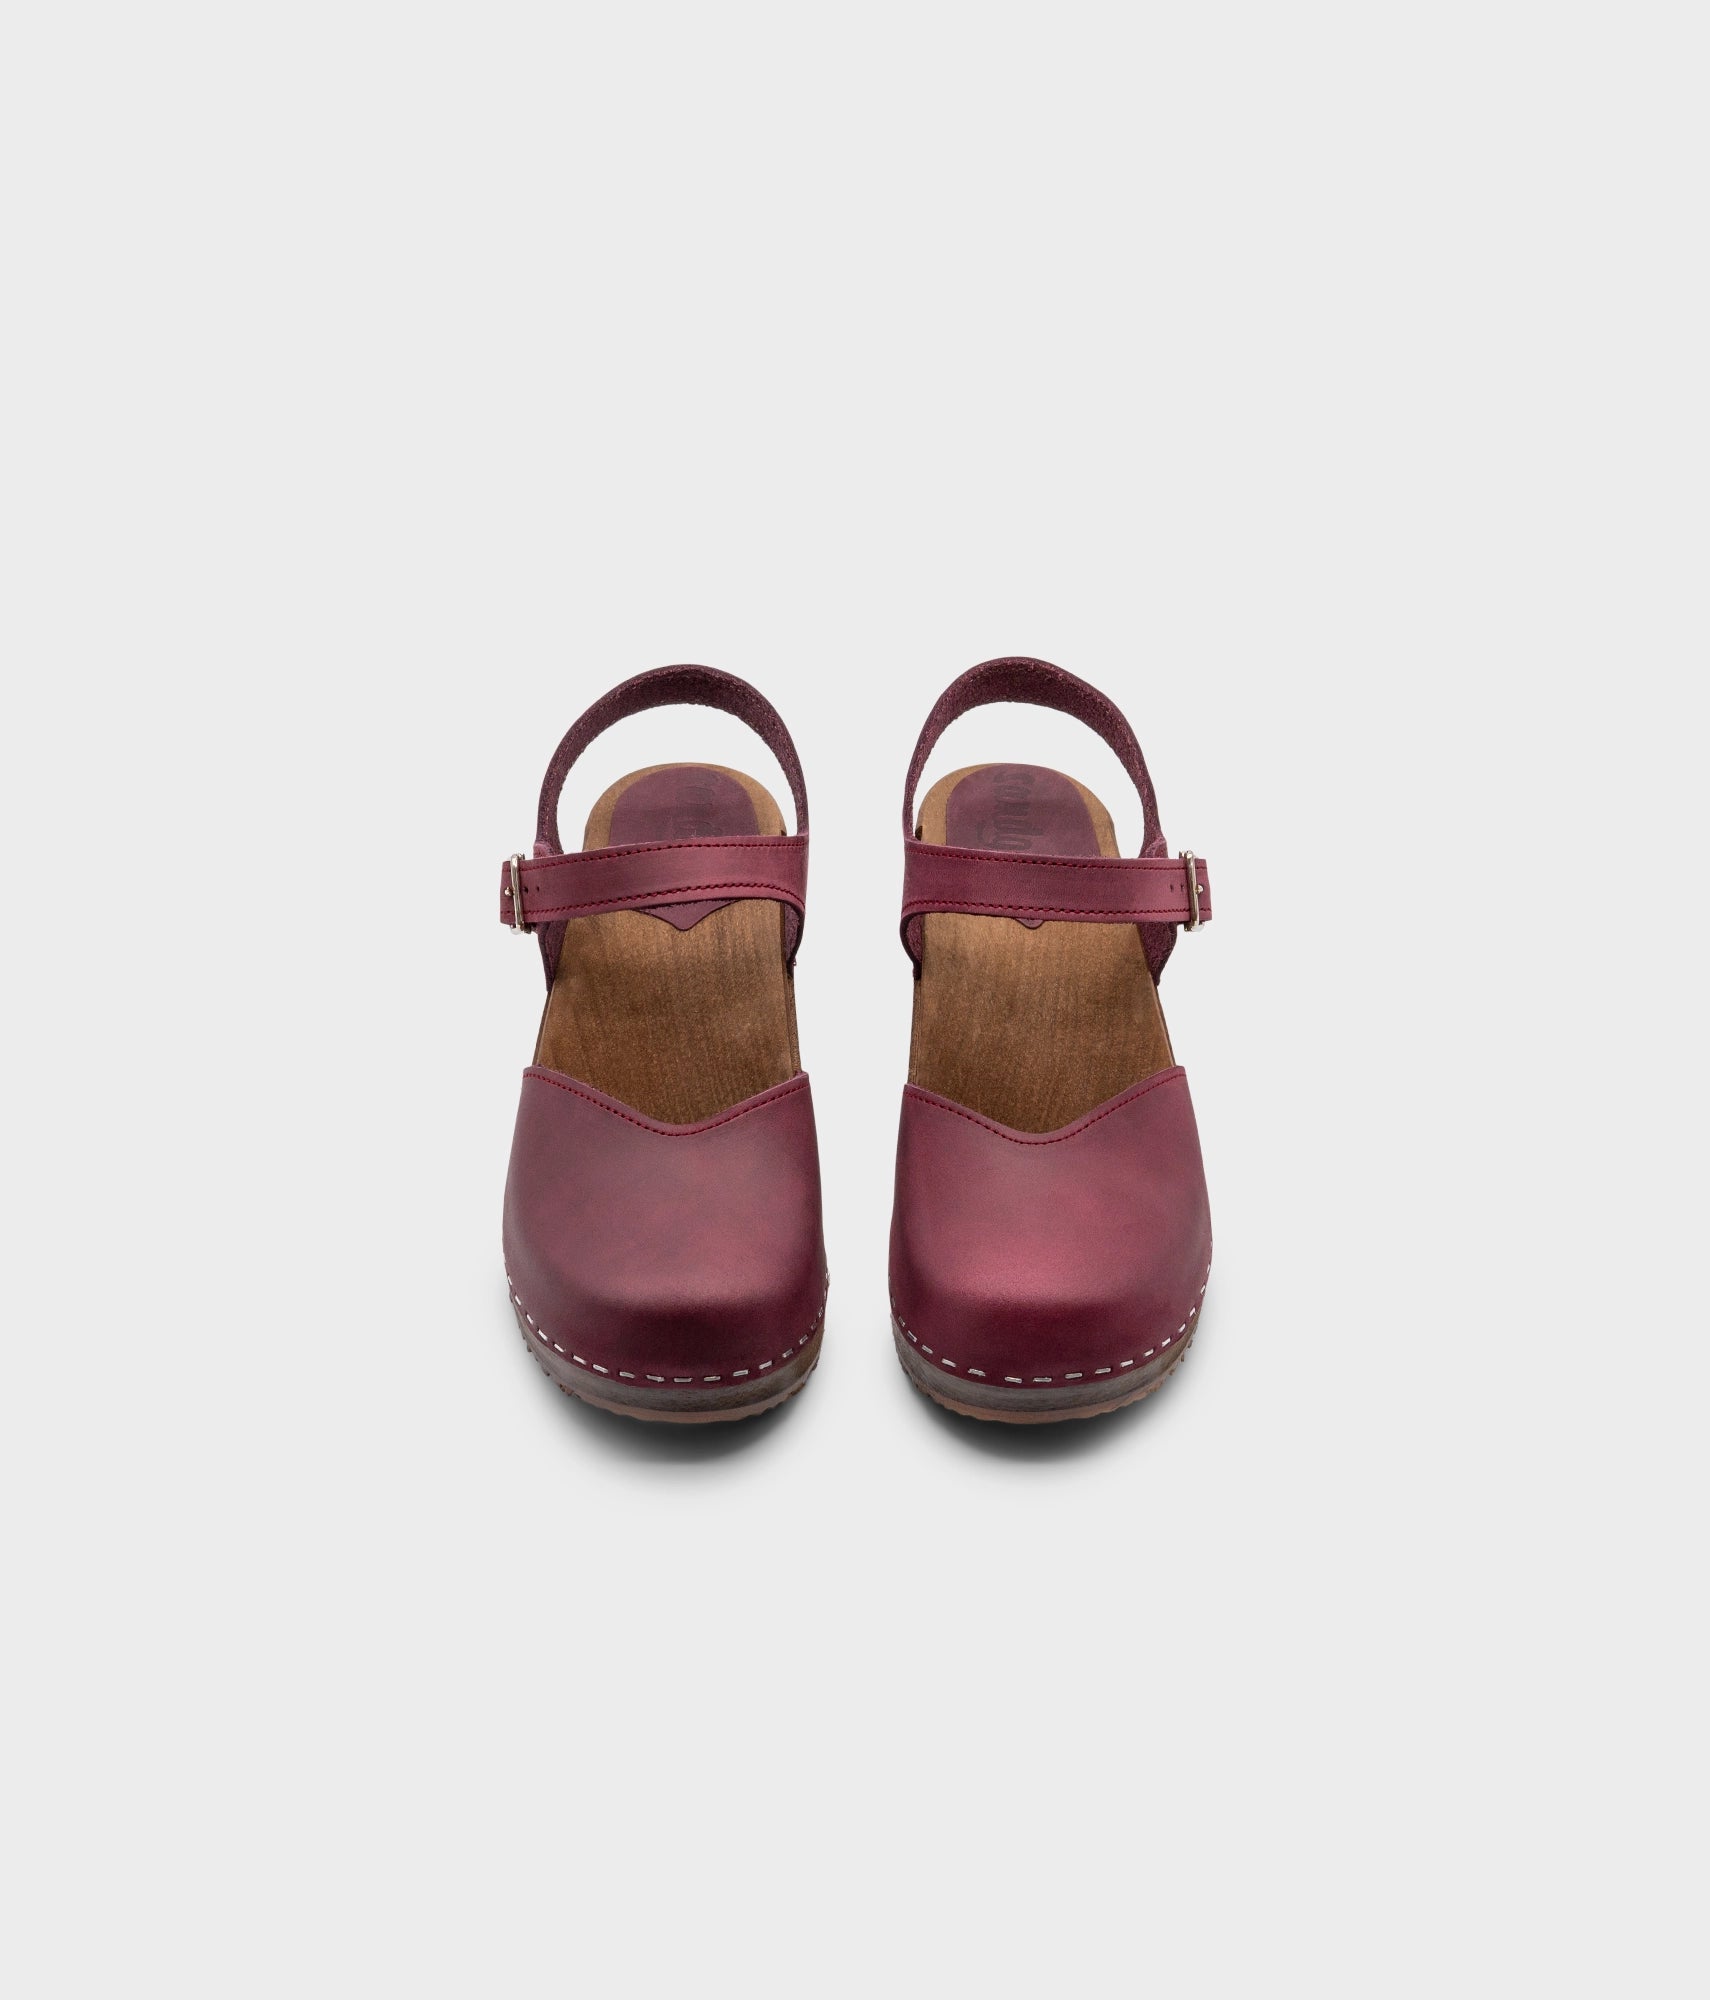 classic low heeled closed-toe sandal in purple plum nubuck leather stapled on a dark wooden base